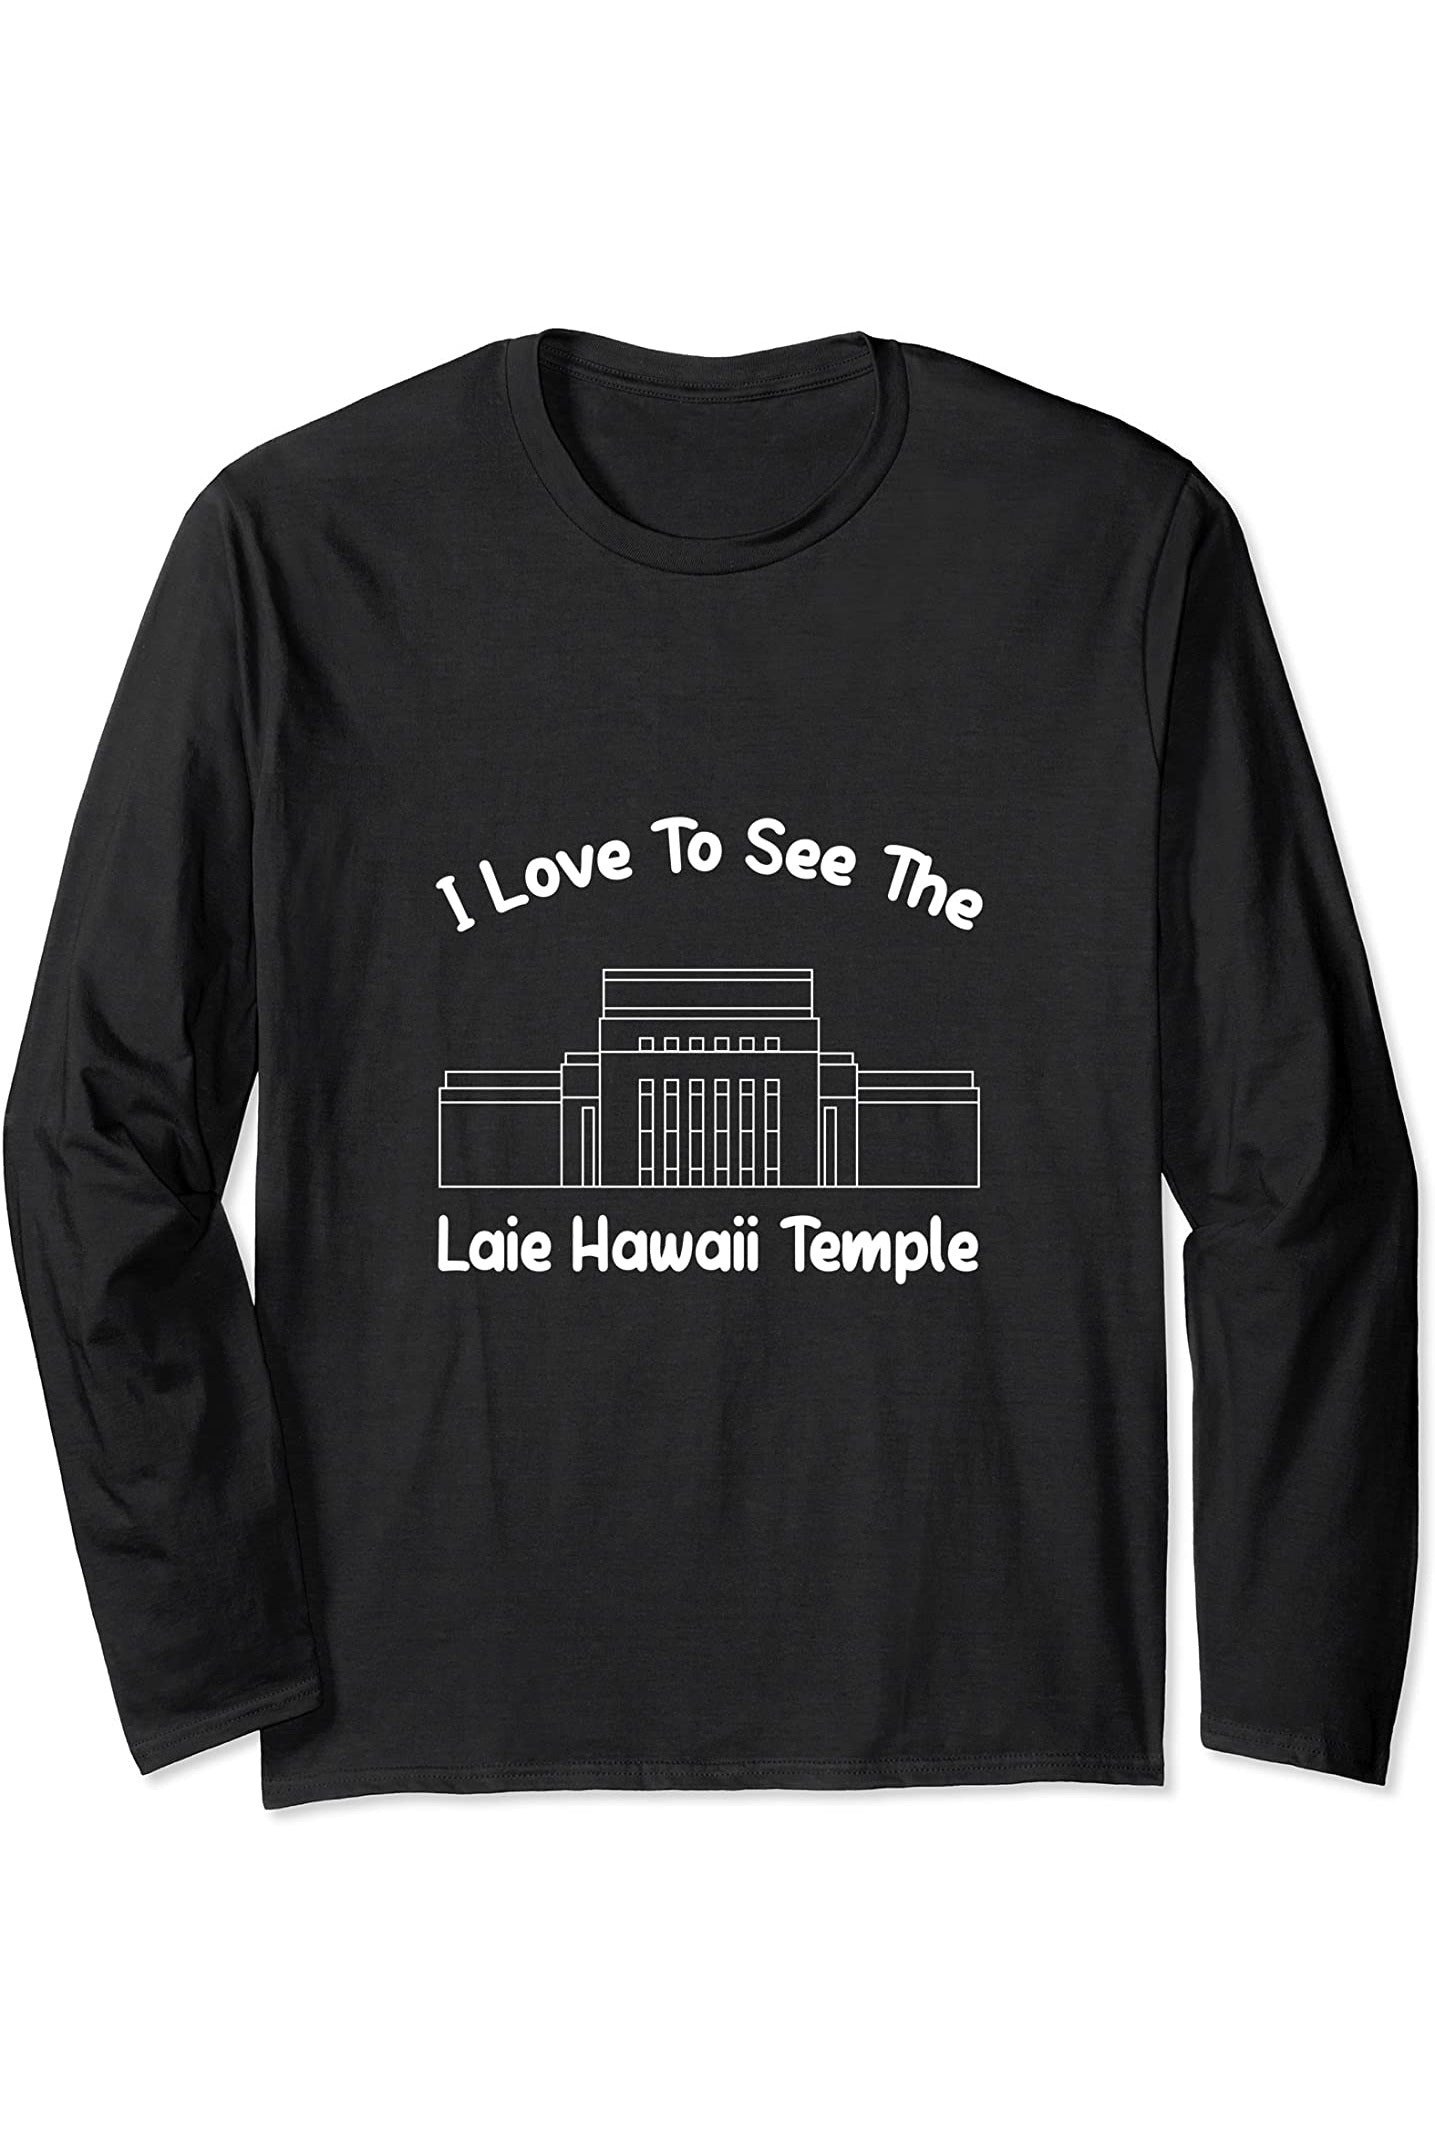 Laie Hawaii Temple Long Sleeve T-Shirt - Primary Style (English) US